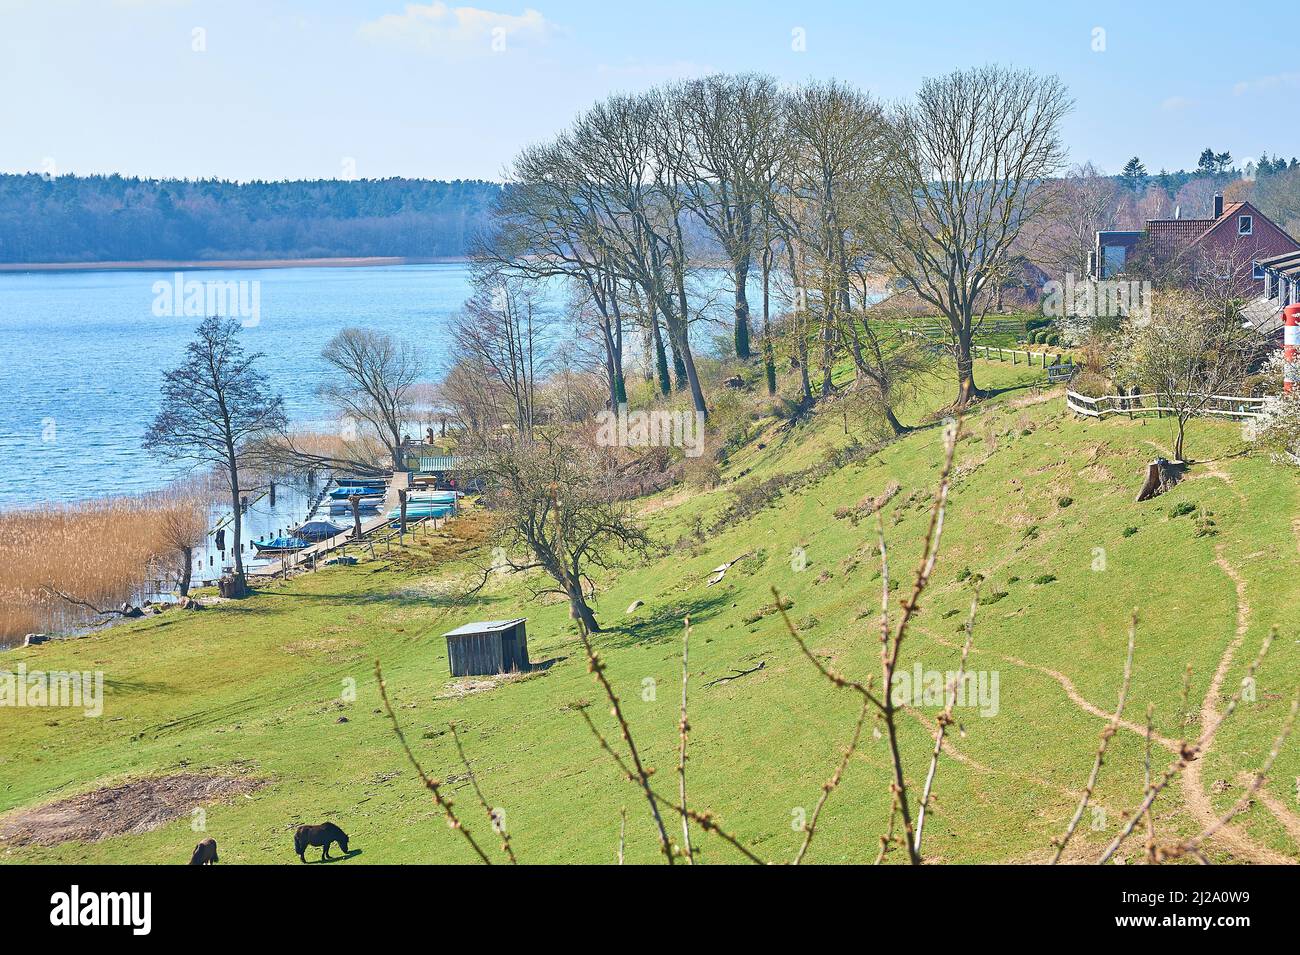 Final ice age moraines at the shore of Lake Schaalsee, Northern Germany Stock Photo